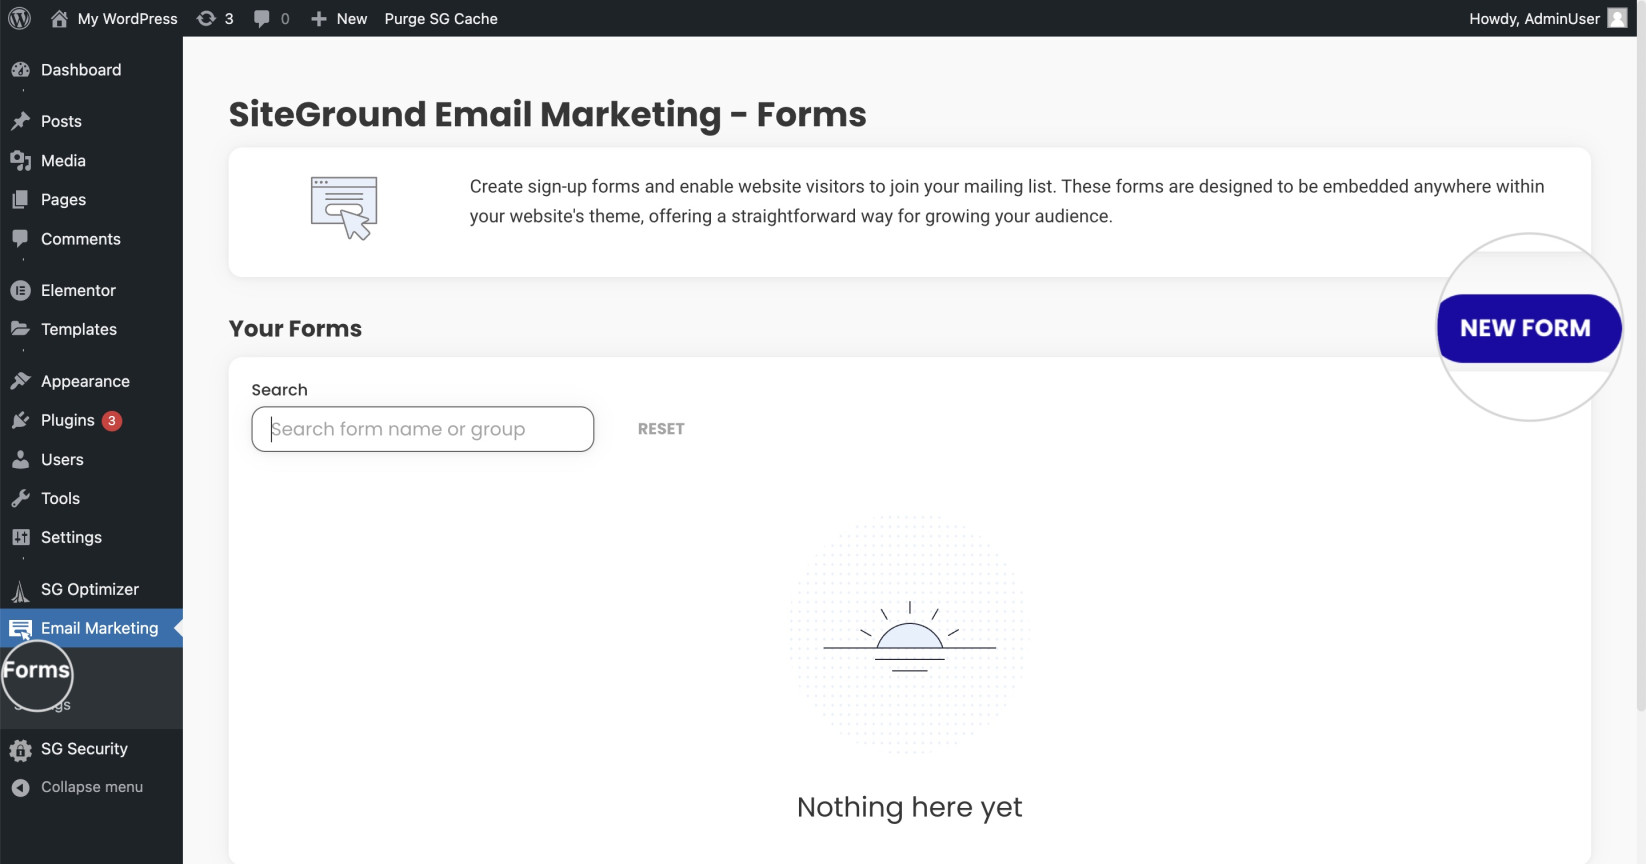 How to create a new sign-up form in the Email Marketing plugin